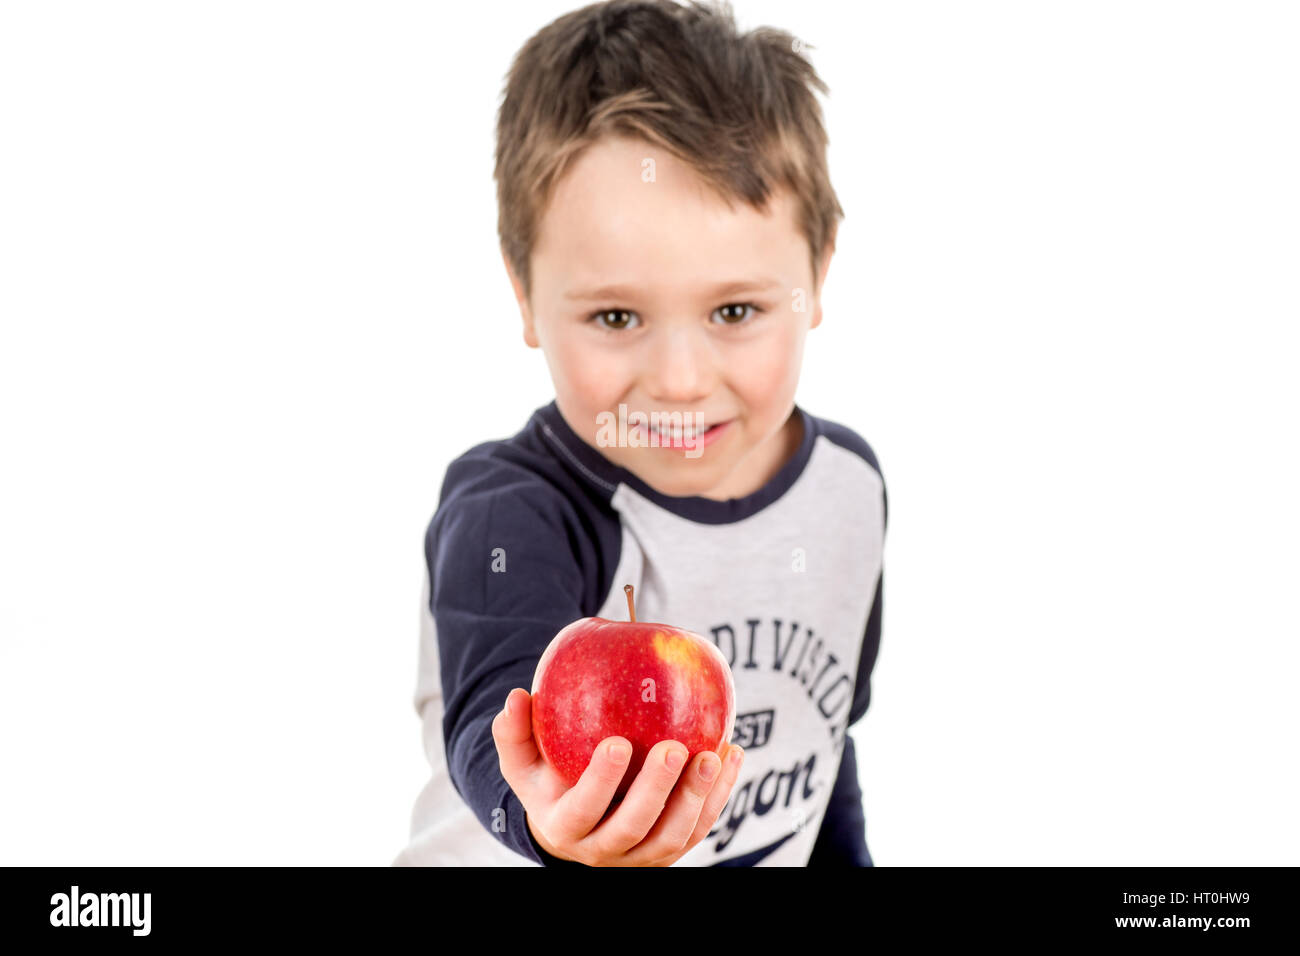 Little smiley boy holding an apple in his hand. Isolated on a white background. Stock Photo